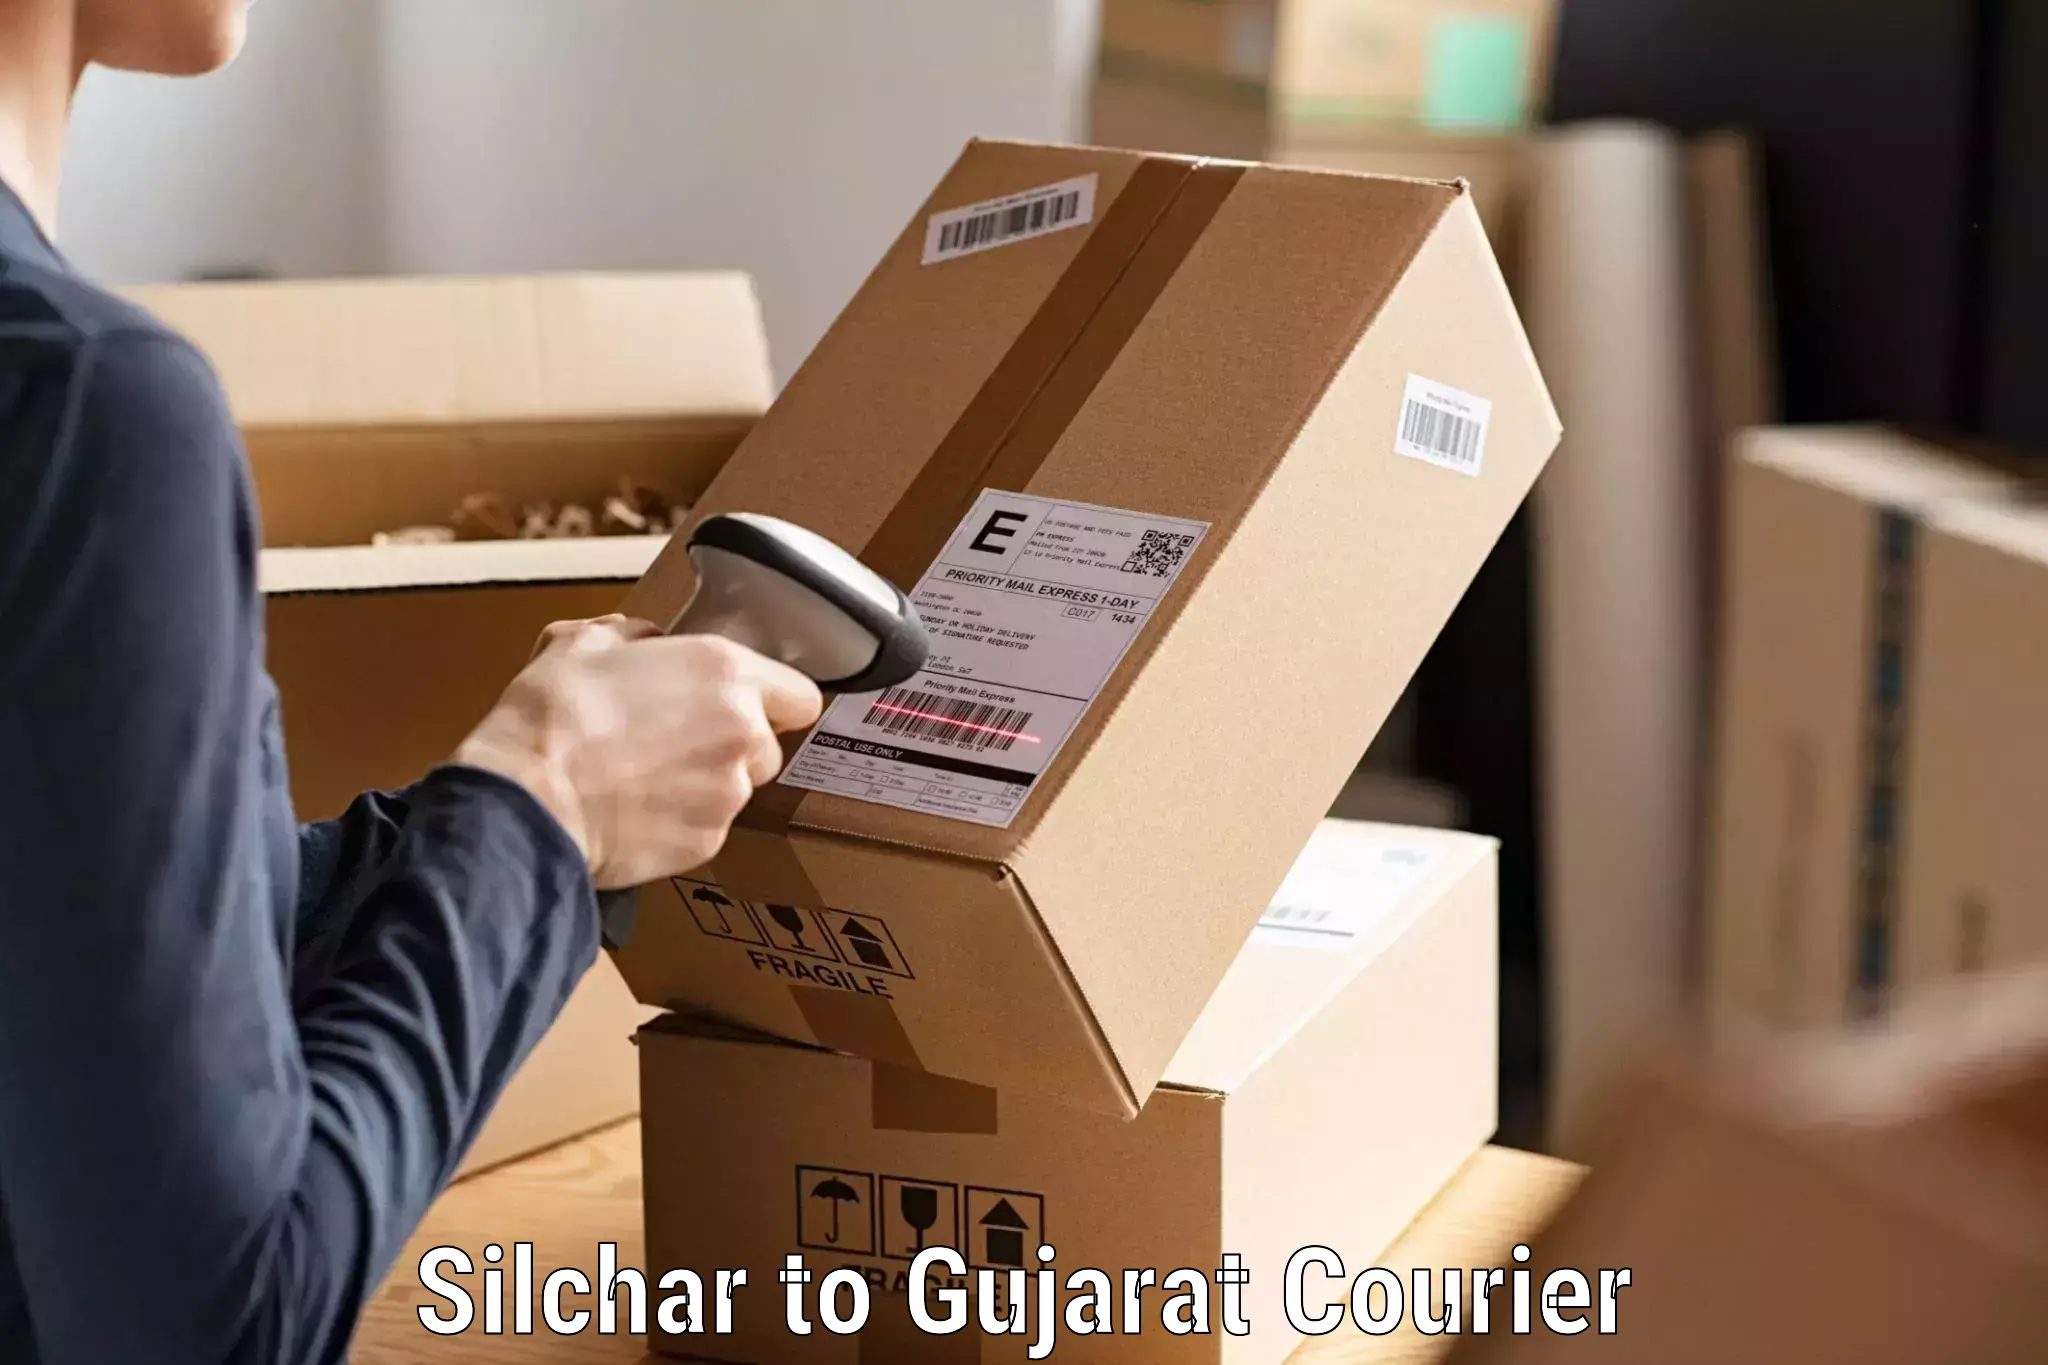 E-commerce shipping Silchar to Ahmedabad